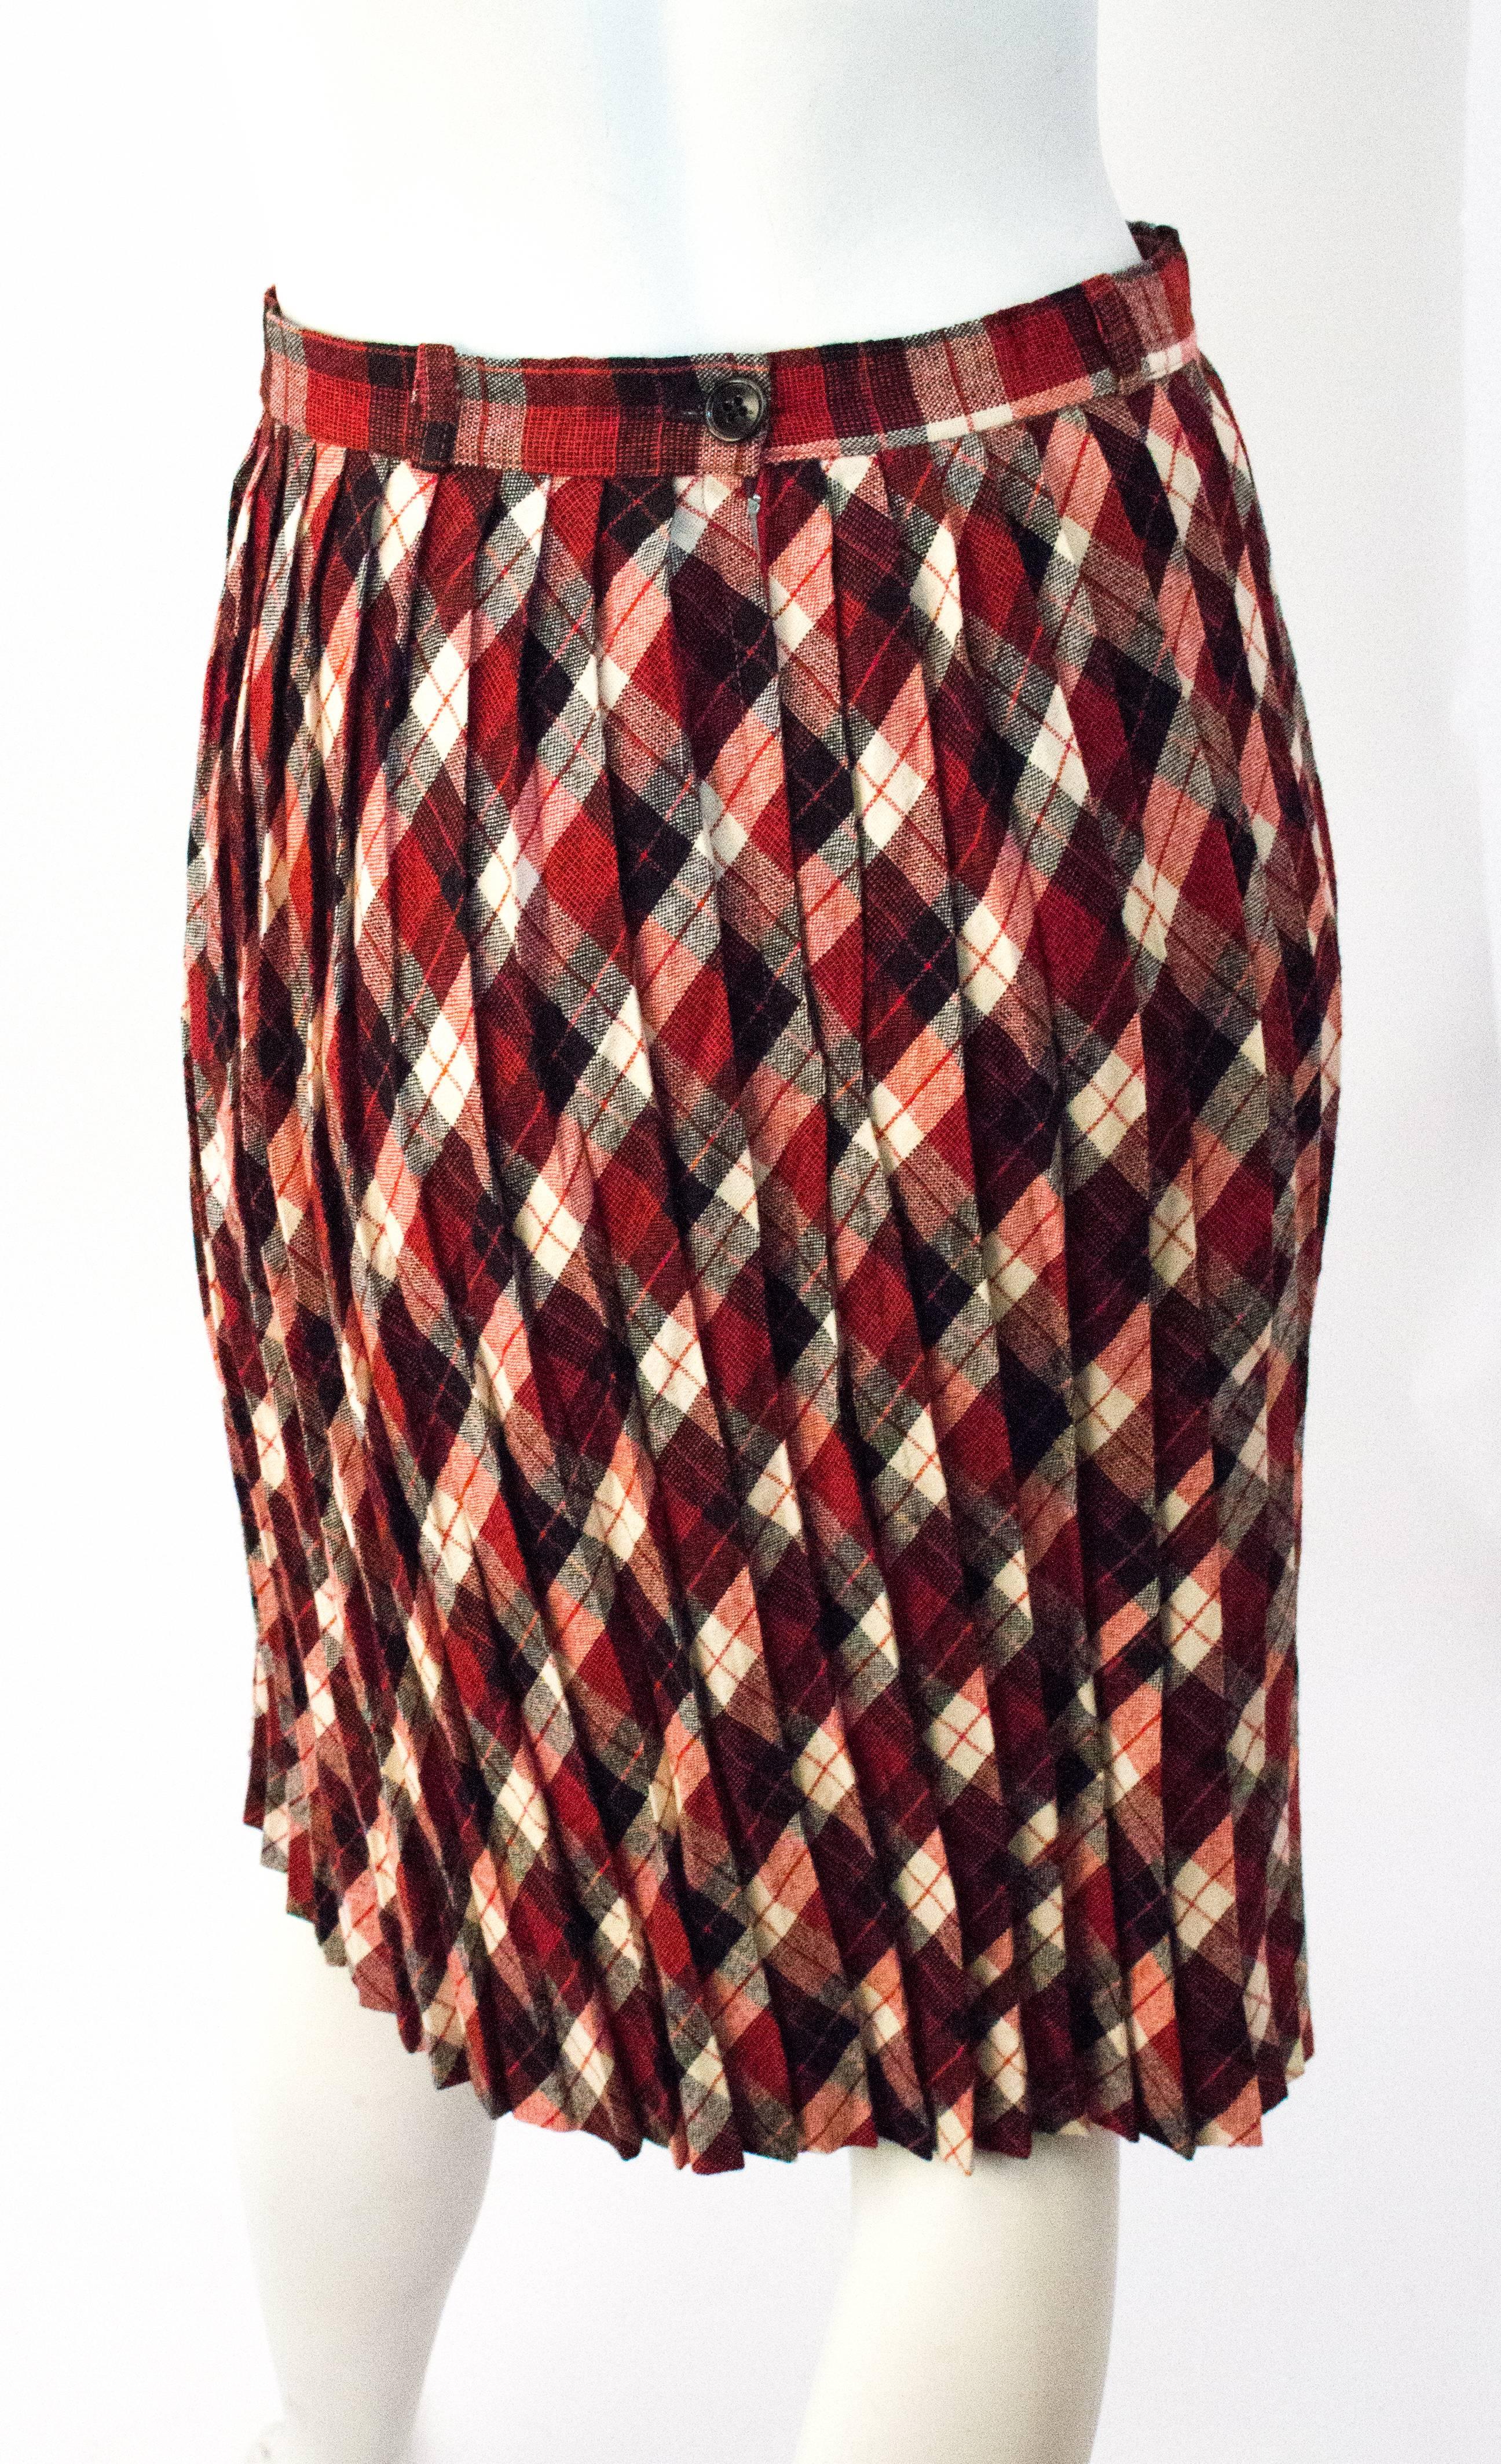 60s Red, Black & Cream Plaid Pleated Skirt. Unlined. Metal zipper up the side. Buttons at the waist. 